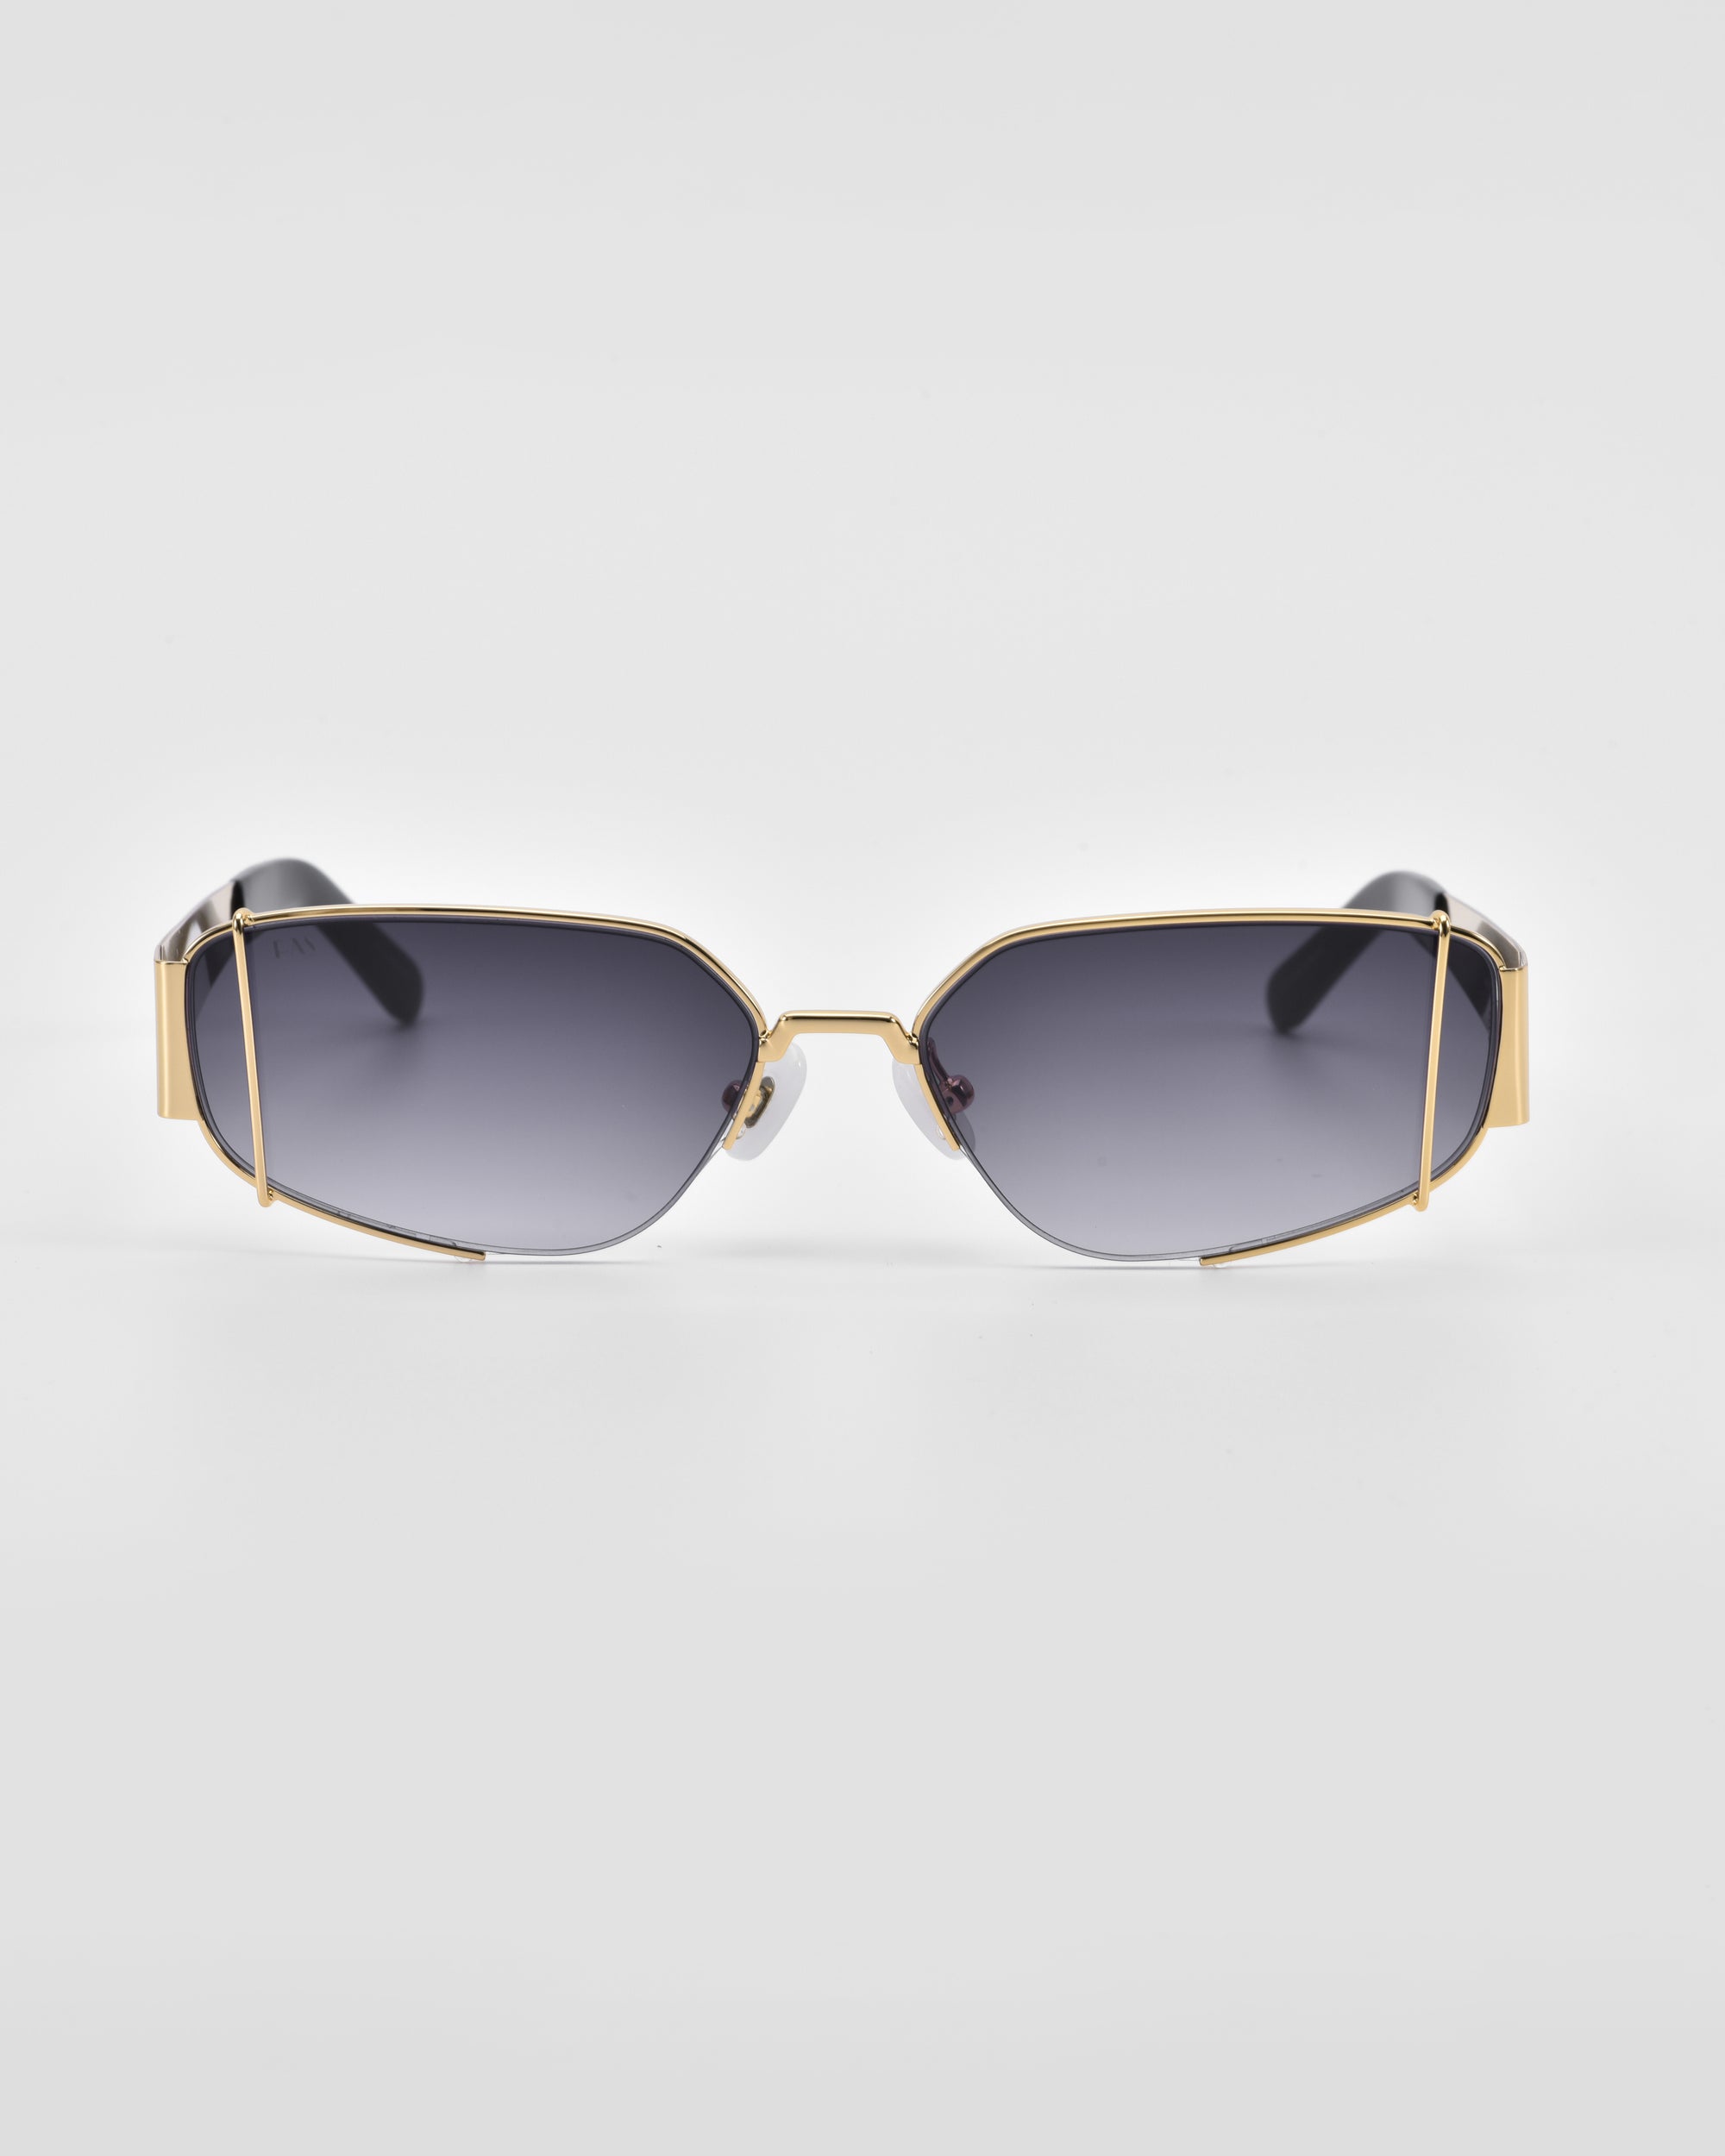 Gold-trimmed, rectangular sunglasses with dark gradient lenses against a white background. *Talia* by *For Art&#39;s Sake®* features 18-karat gold frames with unique angular design accents on the top corners and a delicate nose bridge. The temples are thick and blend into black tips.